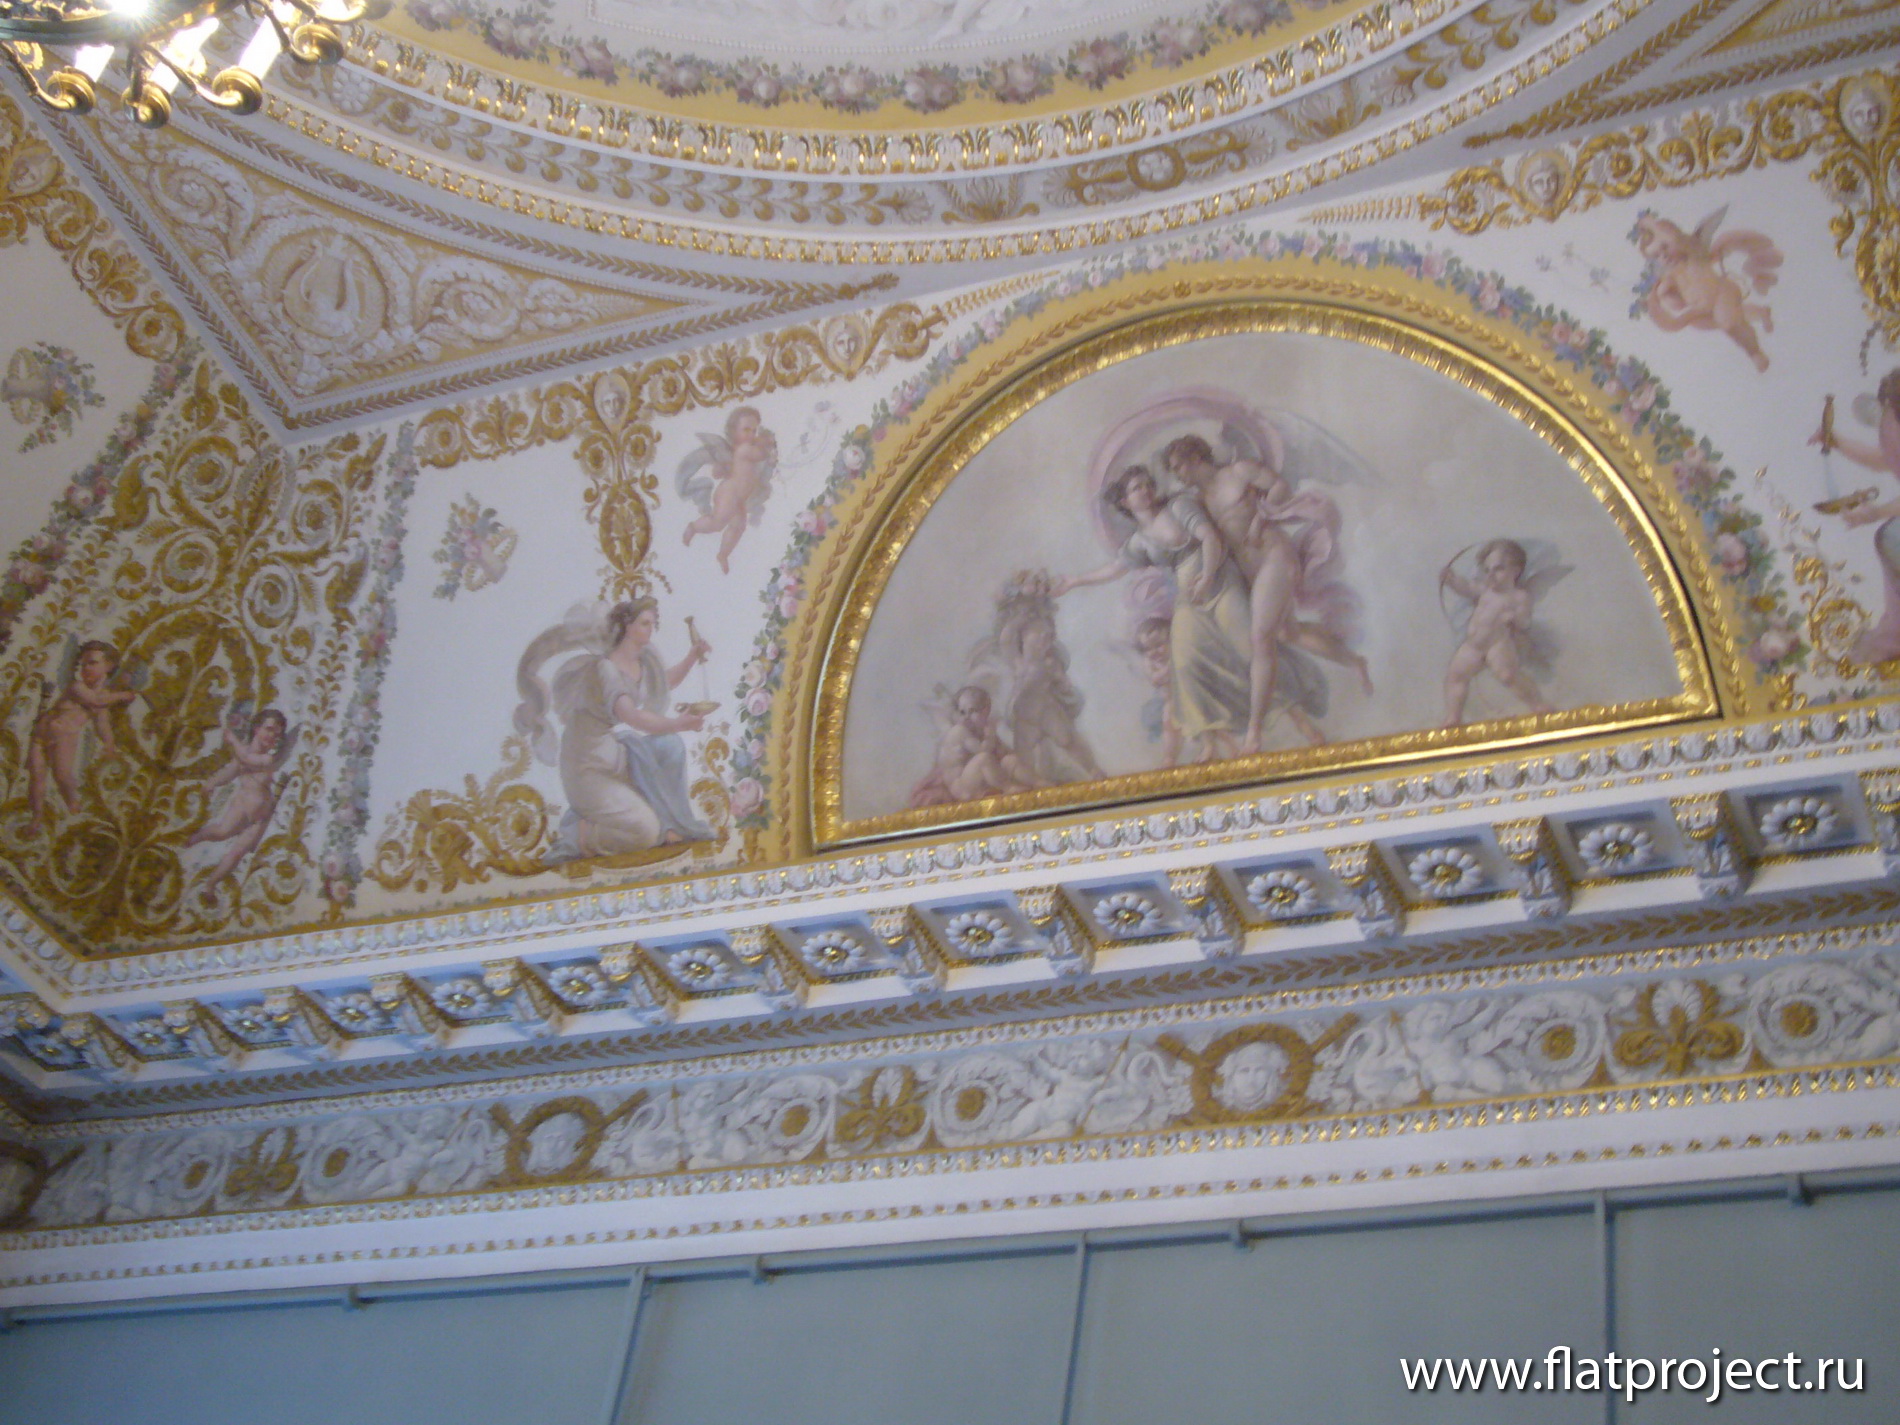 The State Russian museum interiors – photo 50